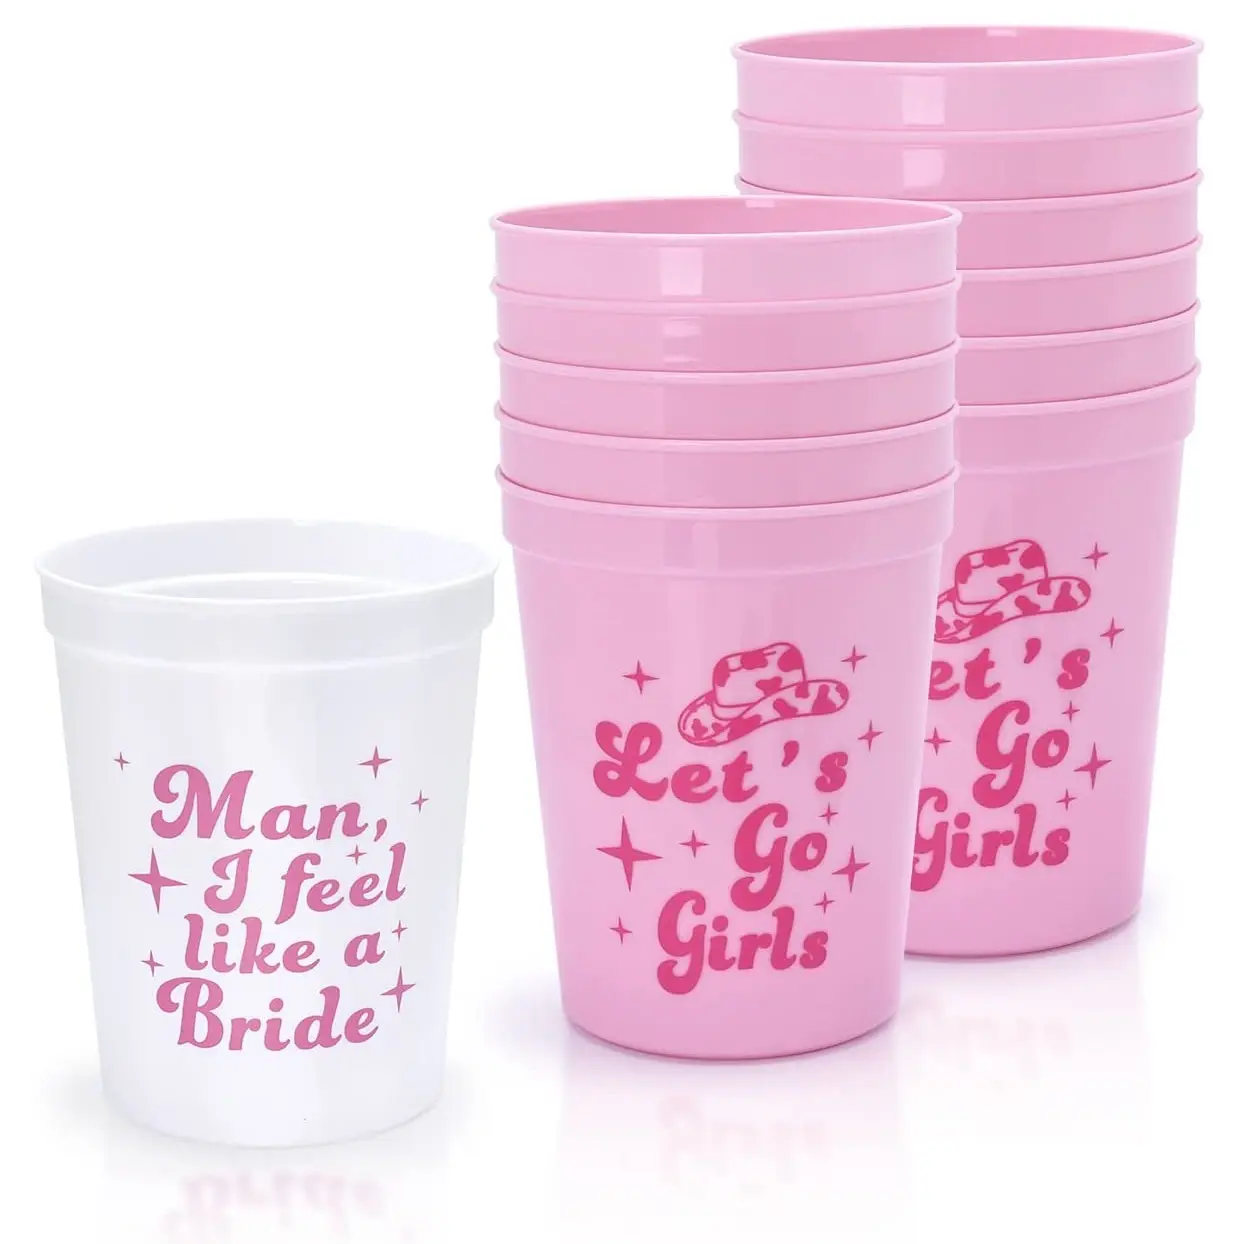 12 Pack Let's Go Girls Reusable Cups Plastic Cowgirl Bridal Shower 70s Theme Retro Bachelorette Party Cup